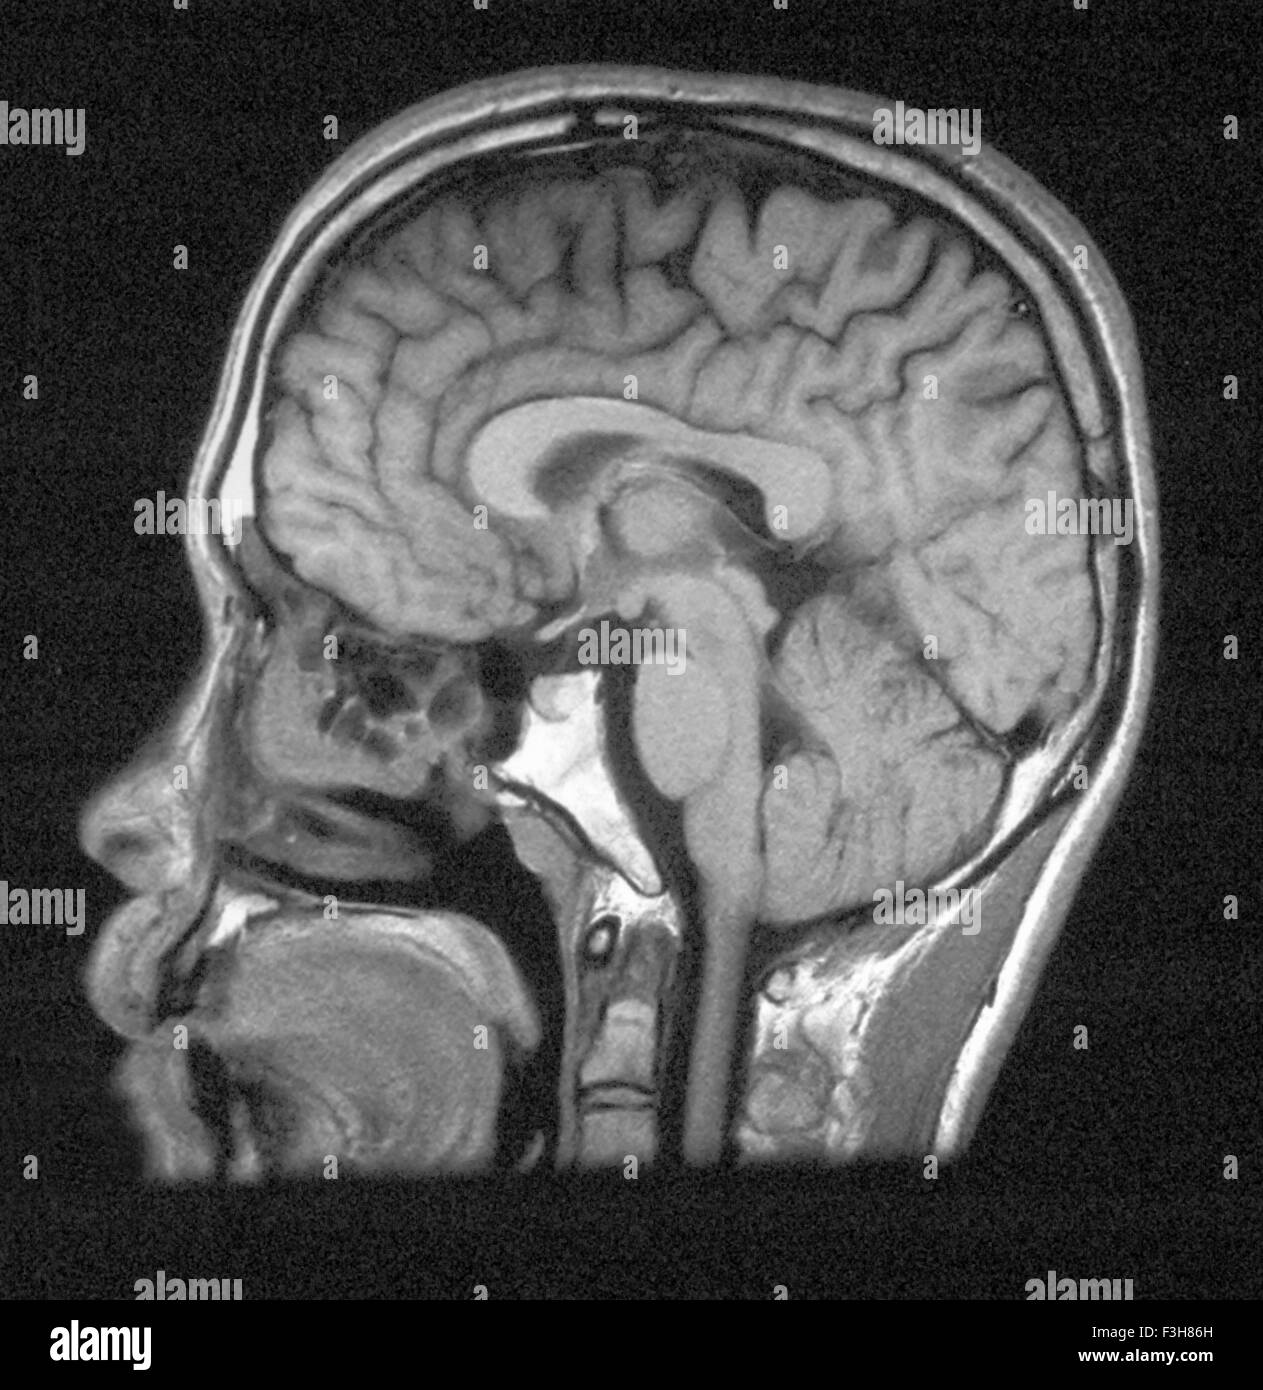 MRI of head showing normal brain structures Stock Photo